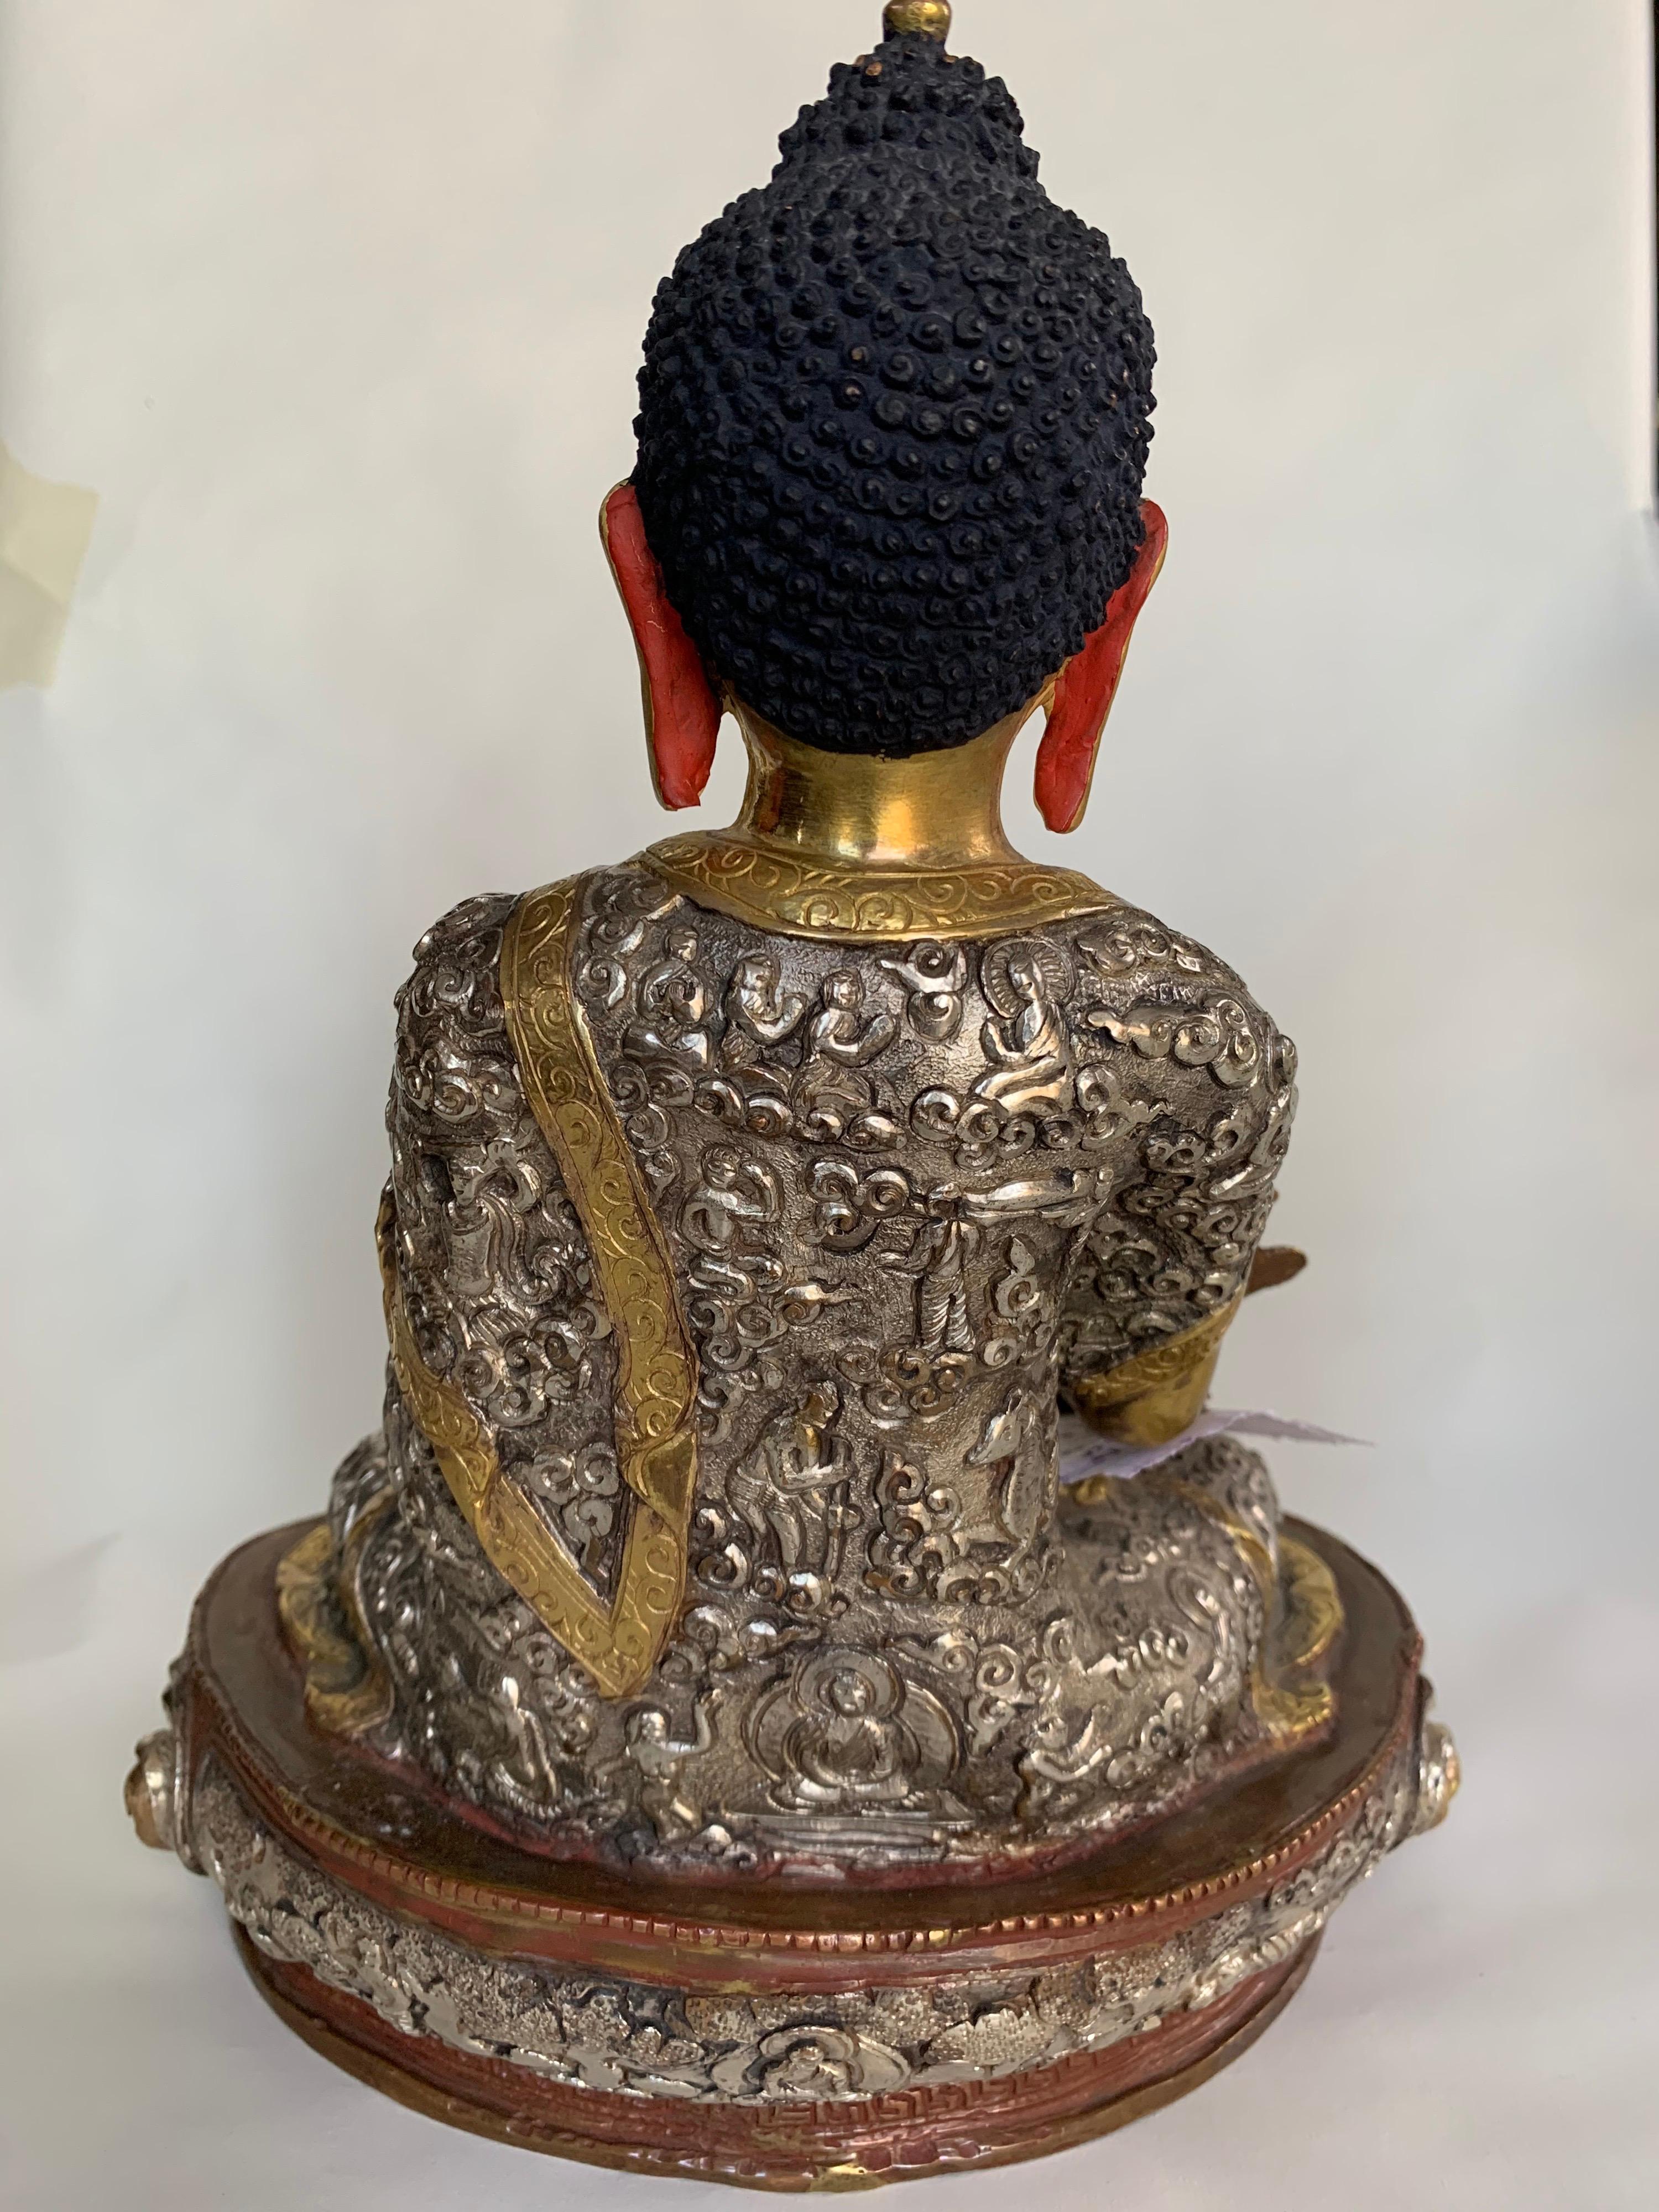 Medicine Buddha Statue 9.5 Inch with 24 Gold Handcrafted by Lost Wax Process - Other Art Style Sculpture by Unknown